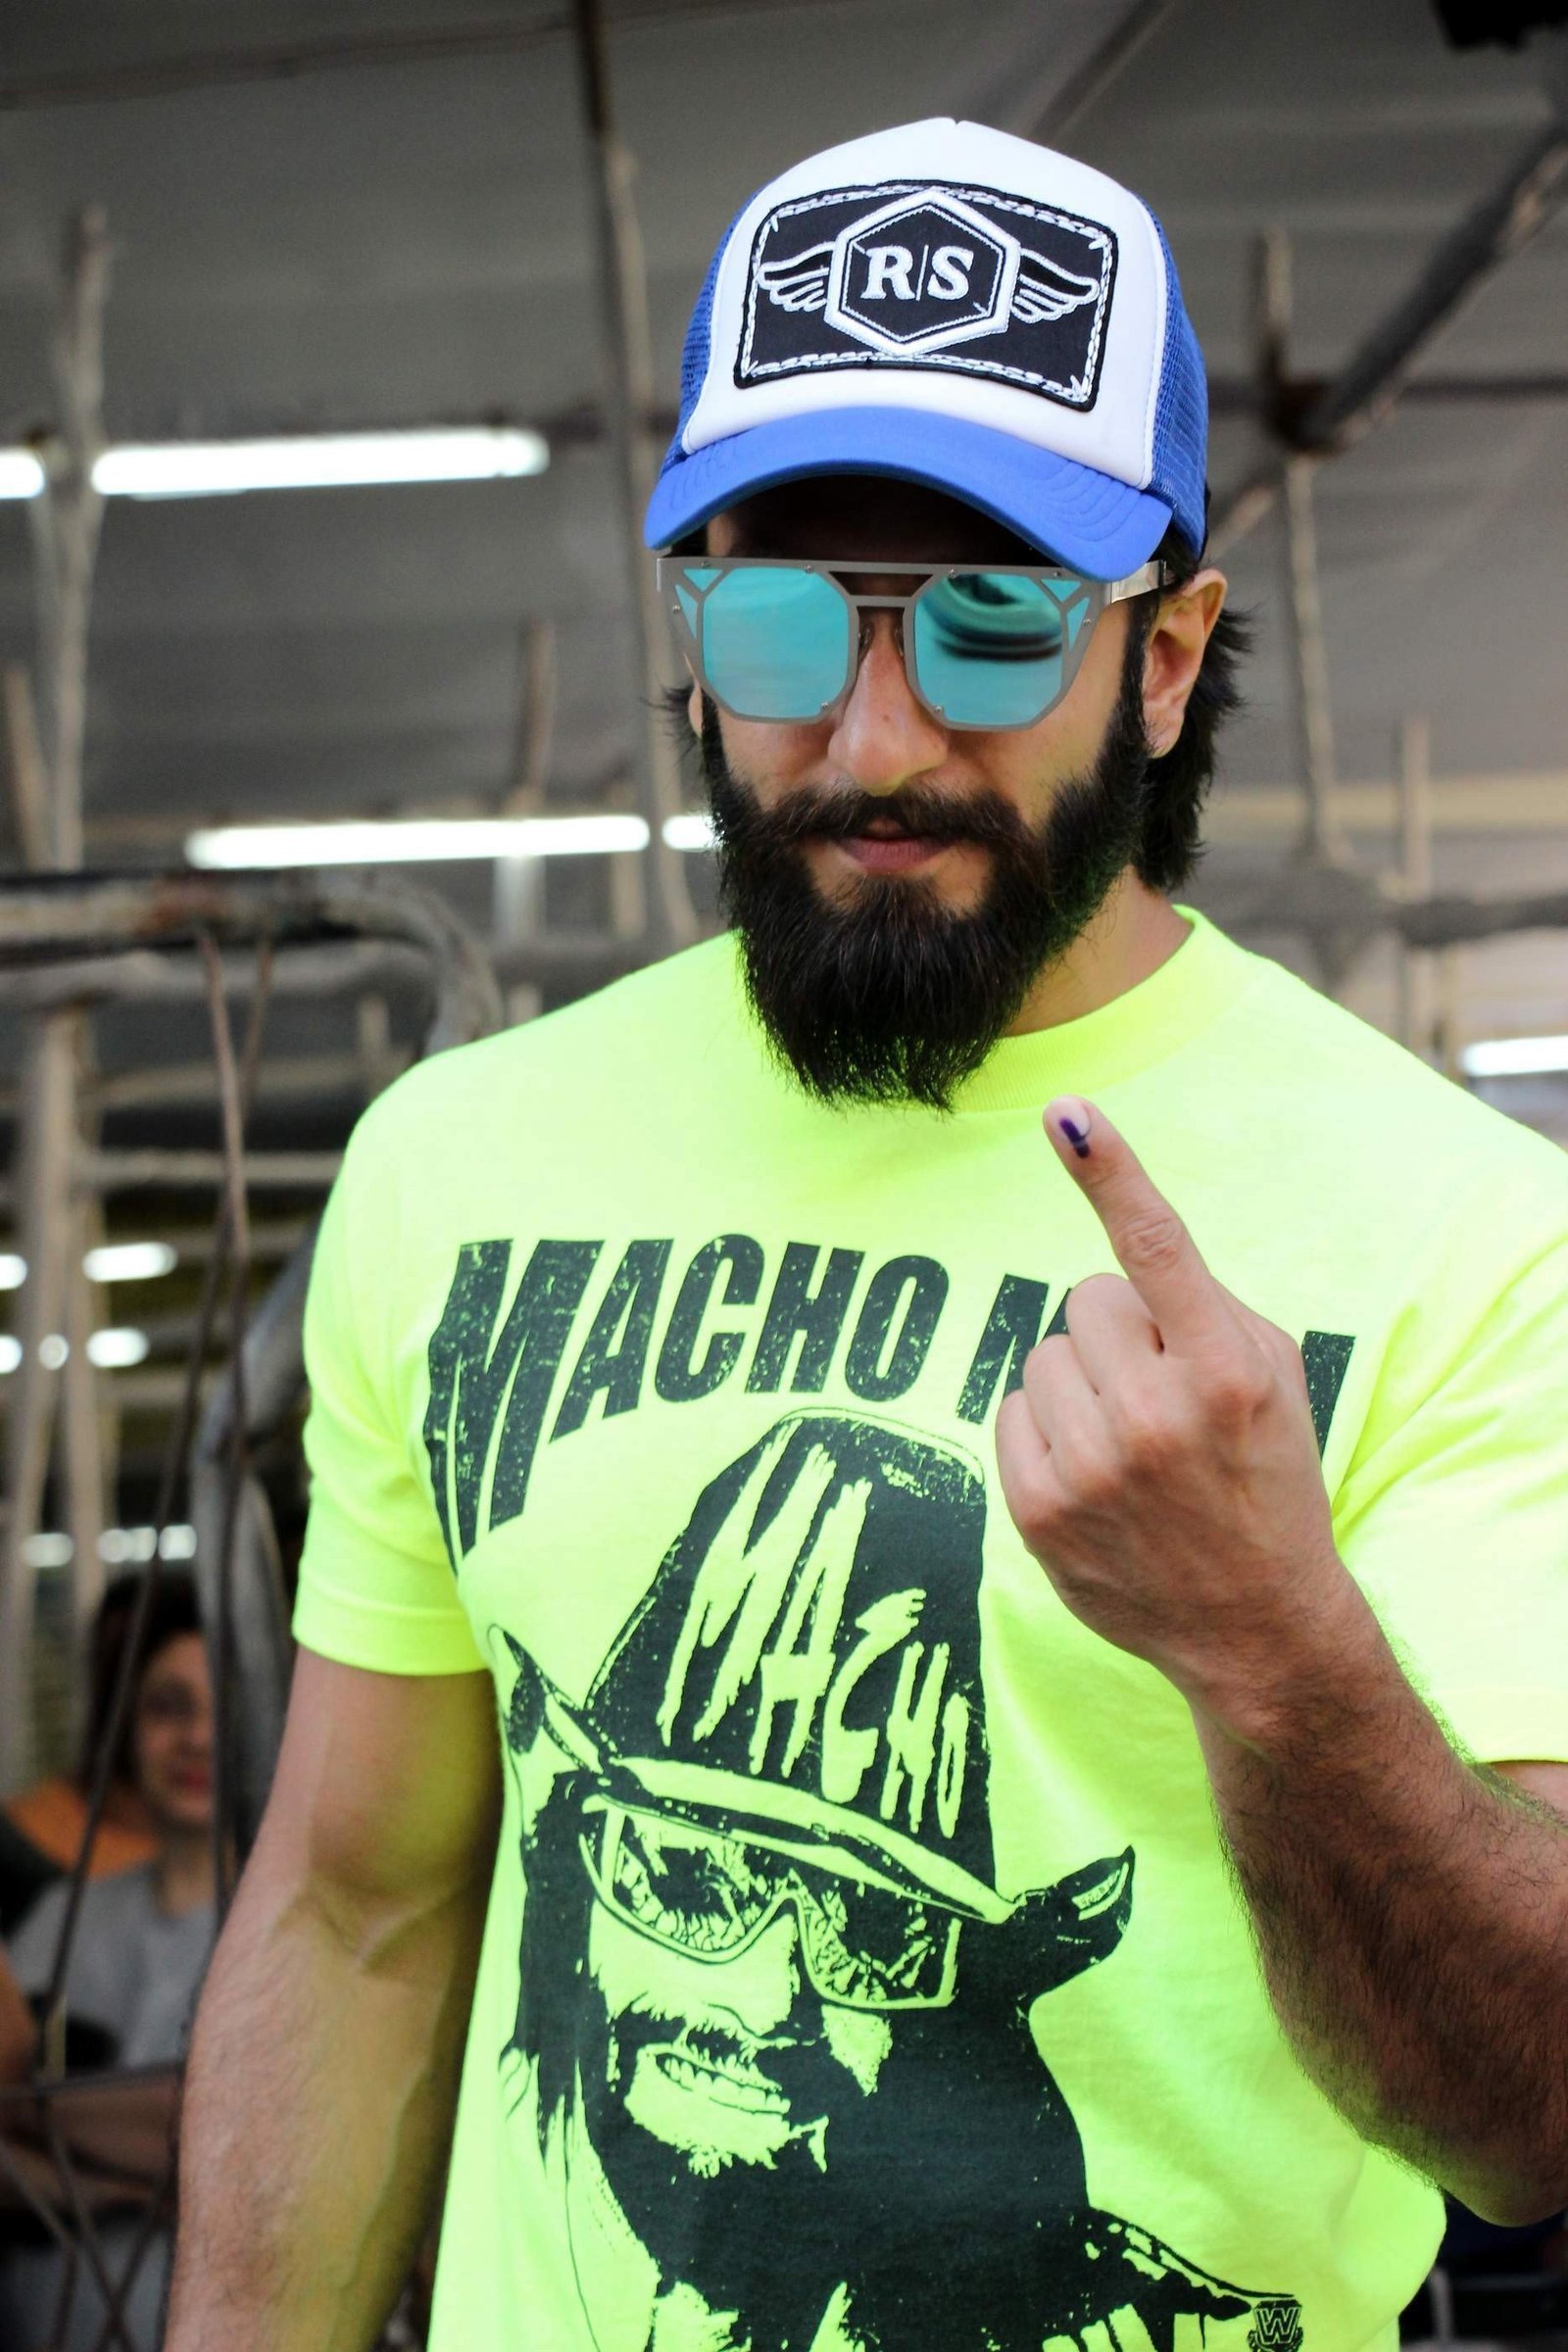 Ranveer Singh - Celebs Casting Their Votes In Bandra for BMC Elections 2017 Images | Picture 1474778